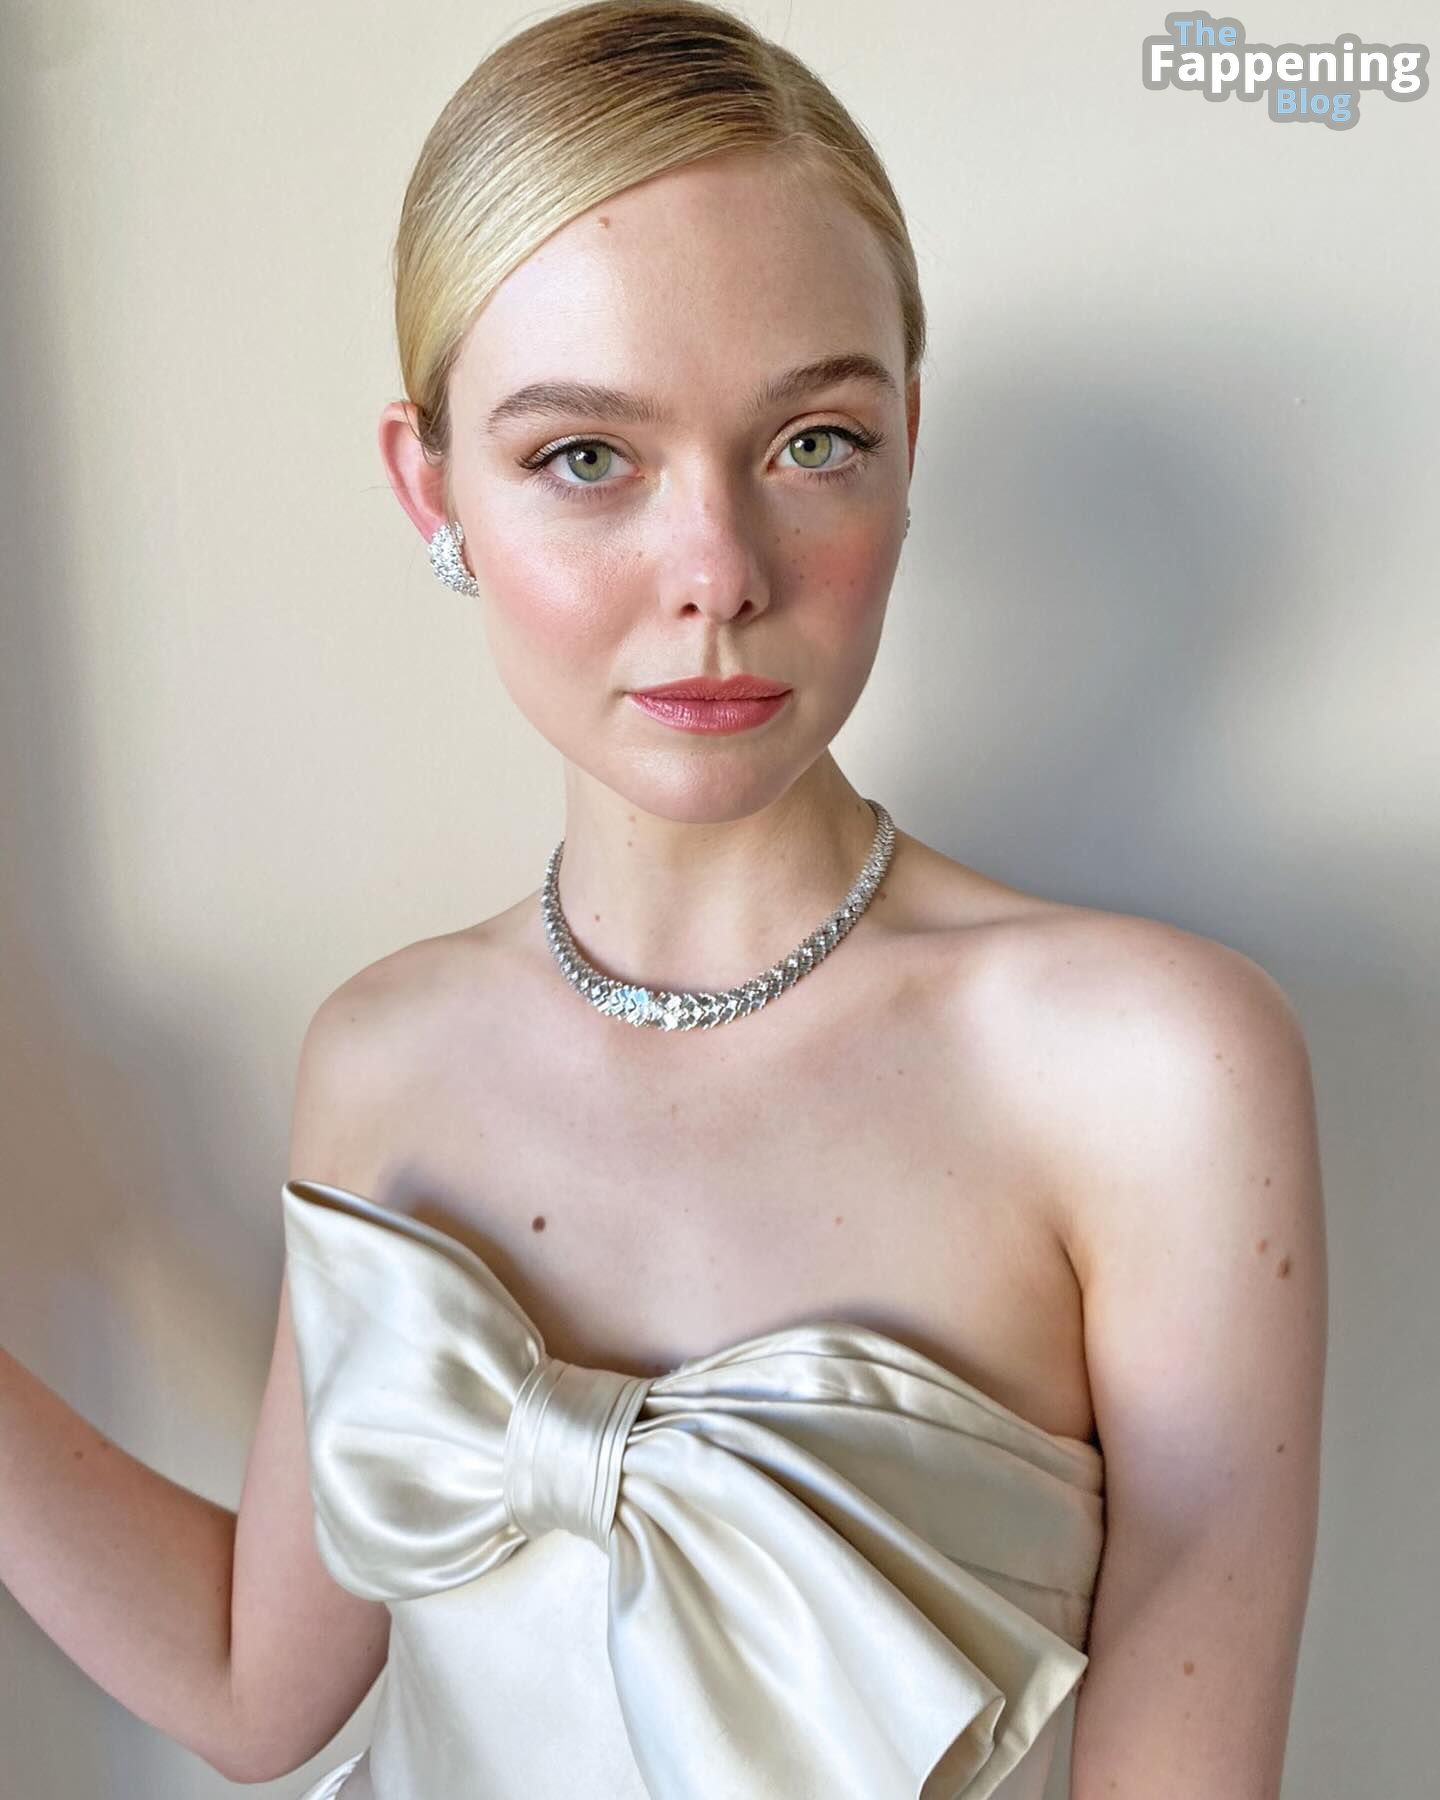 Elle Fanning Looks Pretty at the Golden Globe Awards (143 Photos)